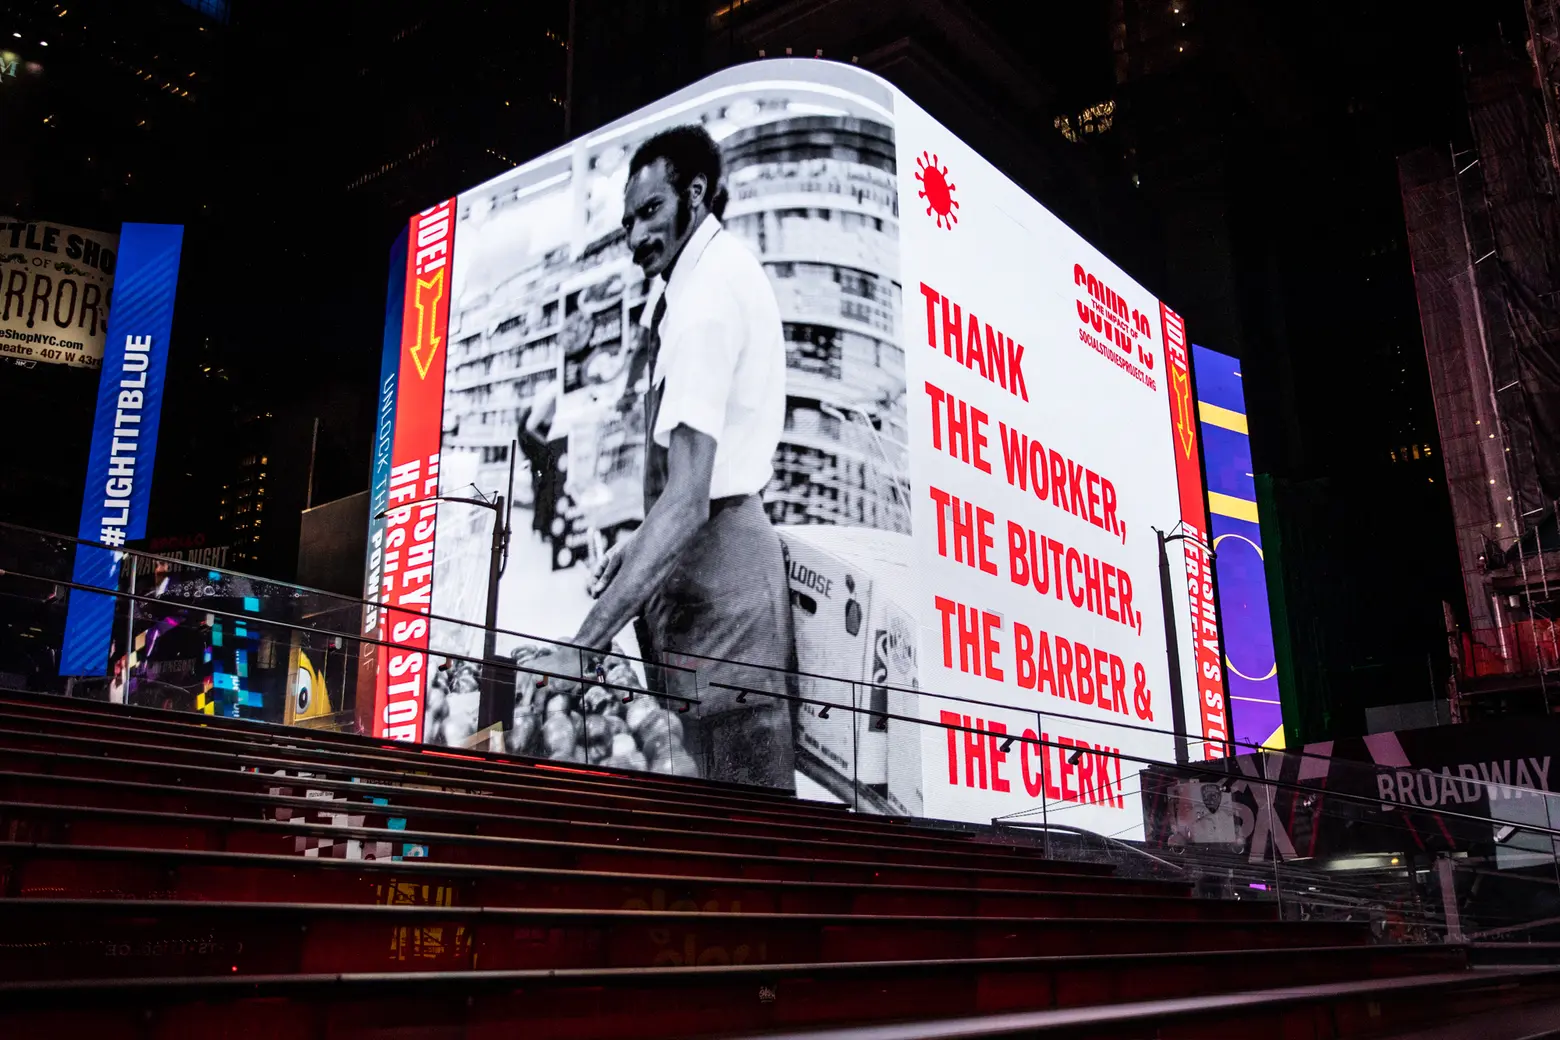 Public art campaign lights up Times Square in support of essential workers